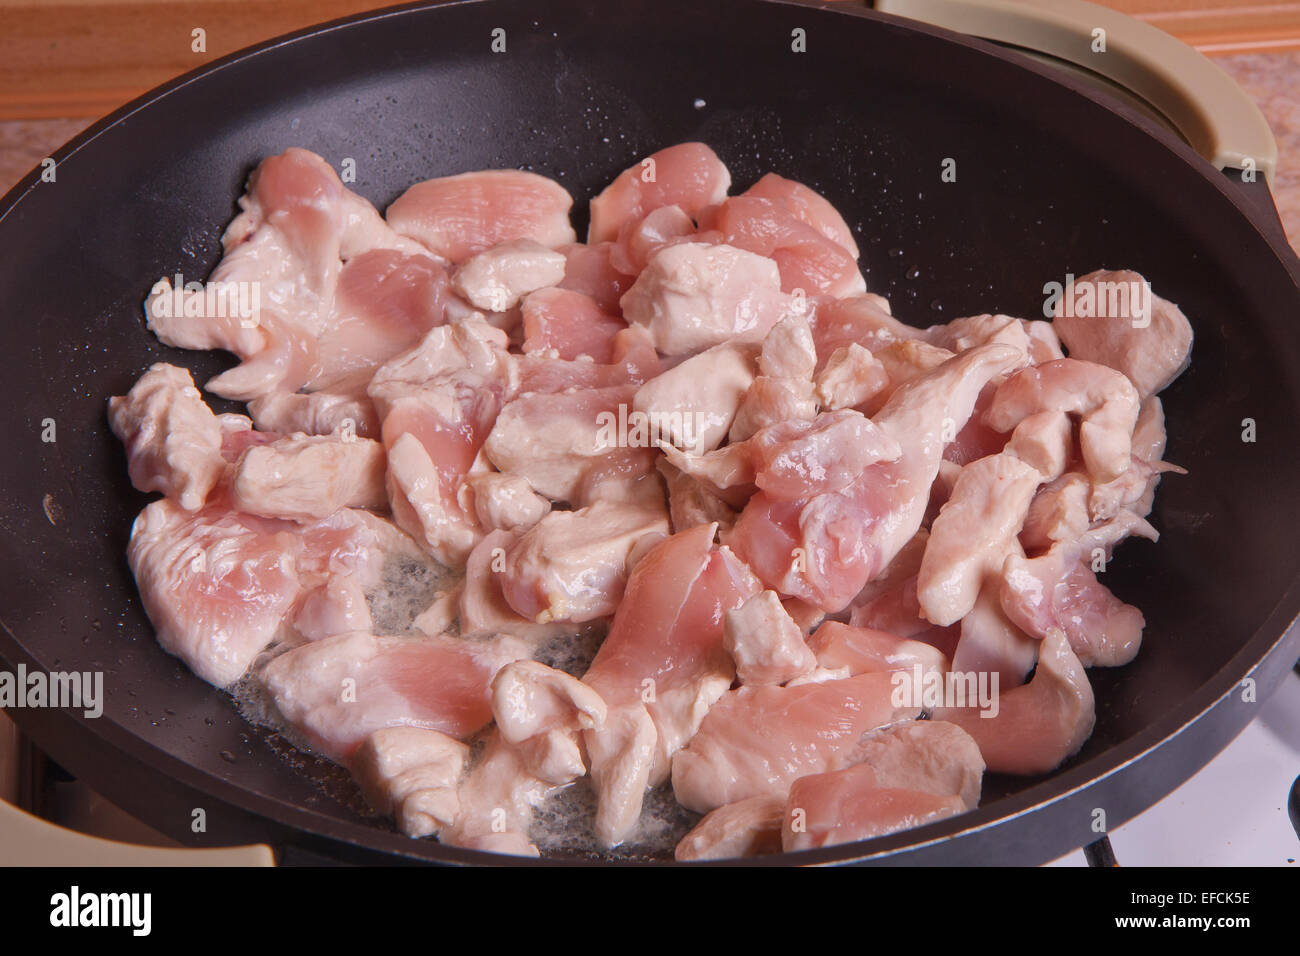 Cutted chicken meet is fried on a deep frying pan. Stock Photo